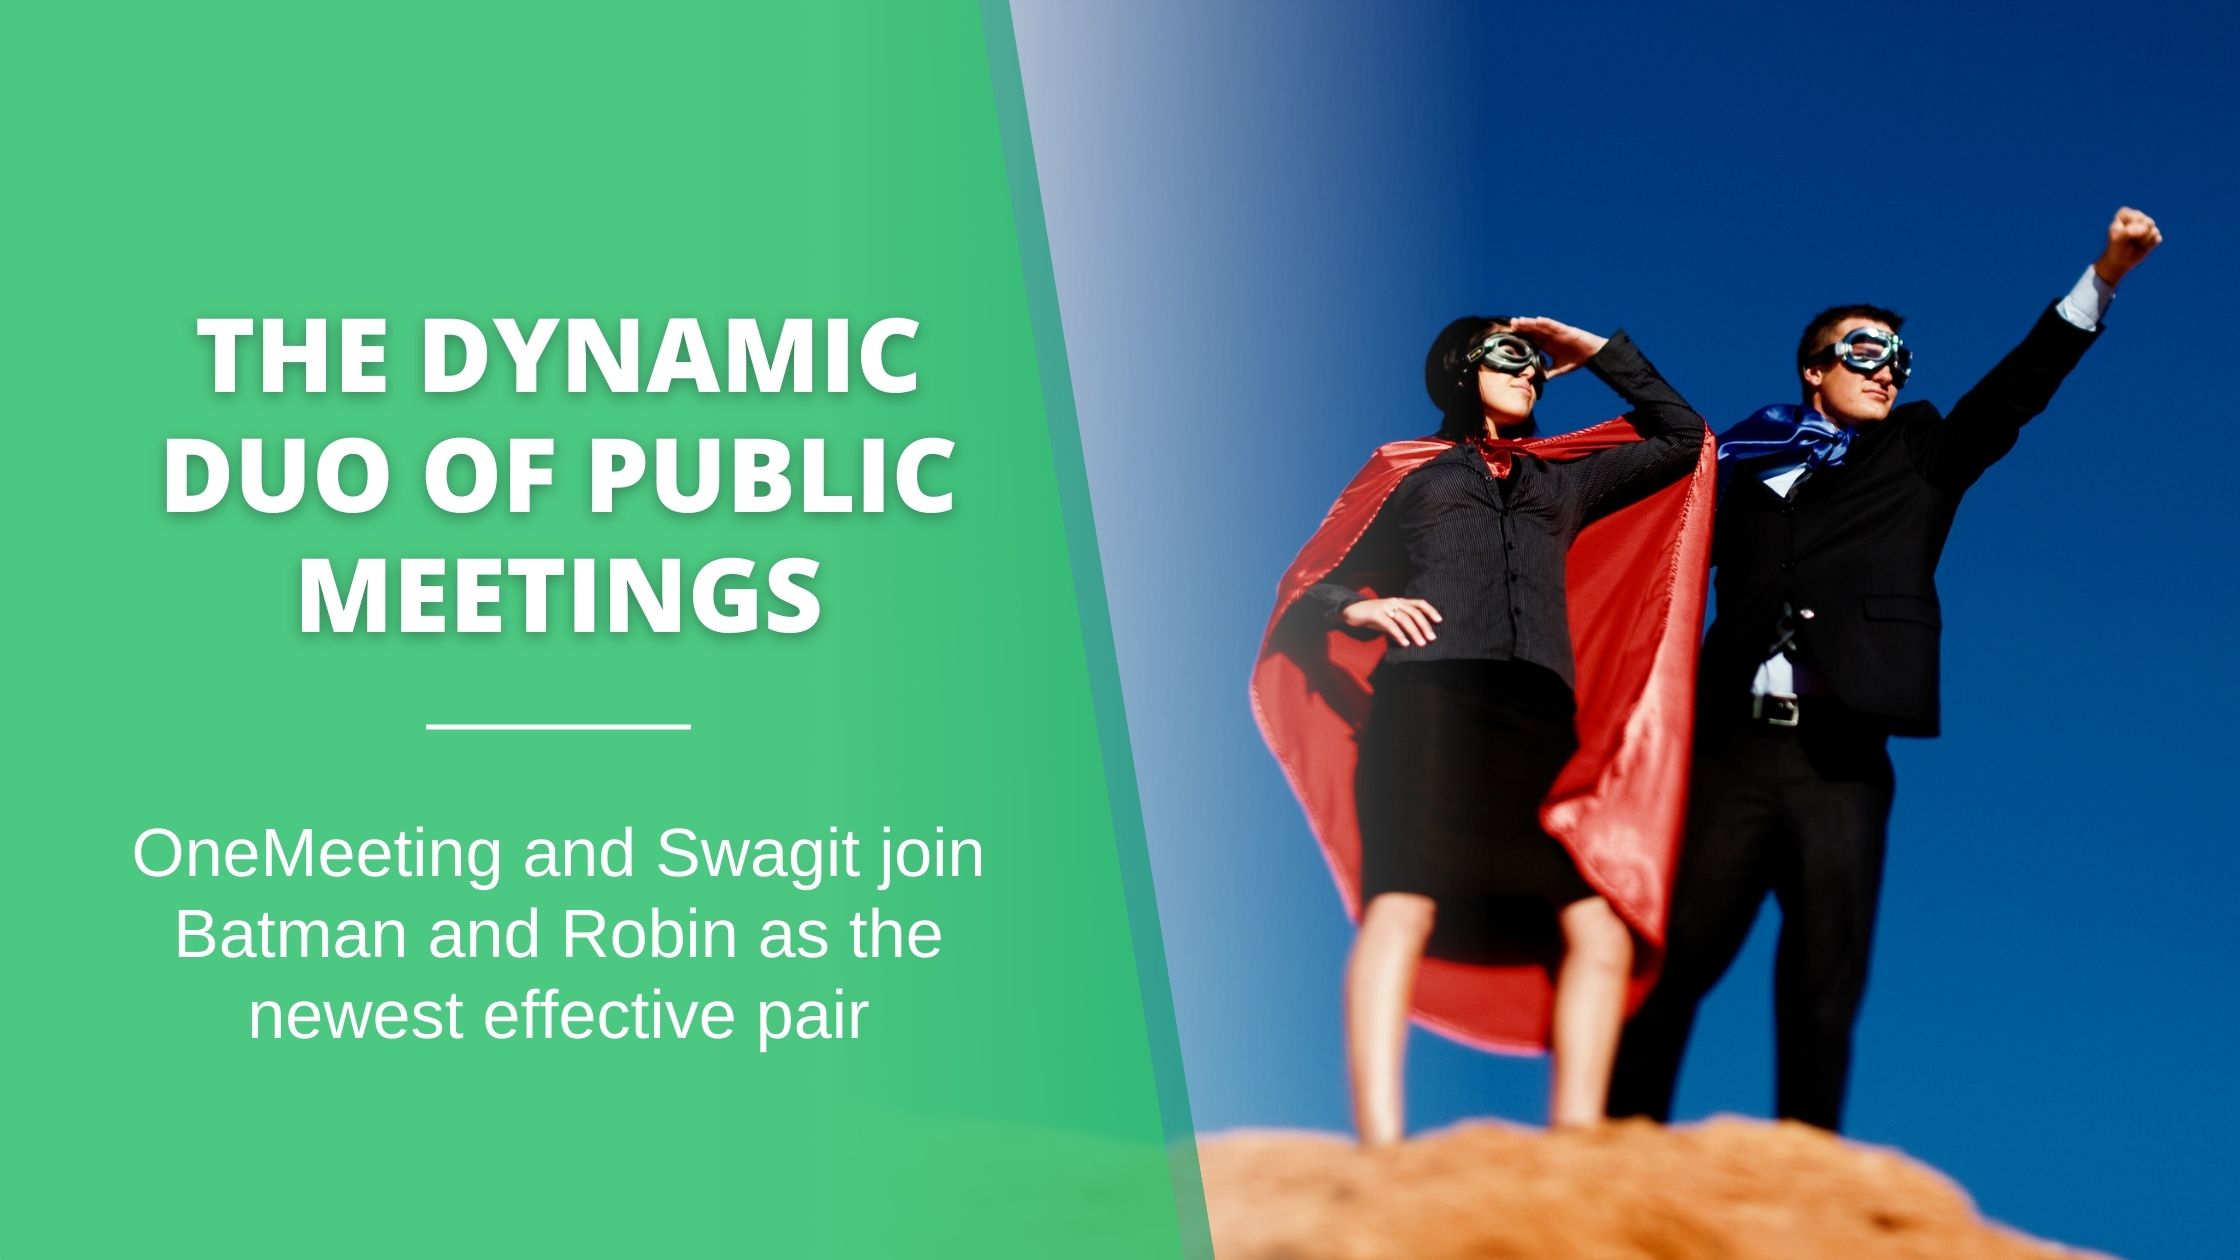 The Dynamic Duo of Public Meetings